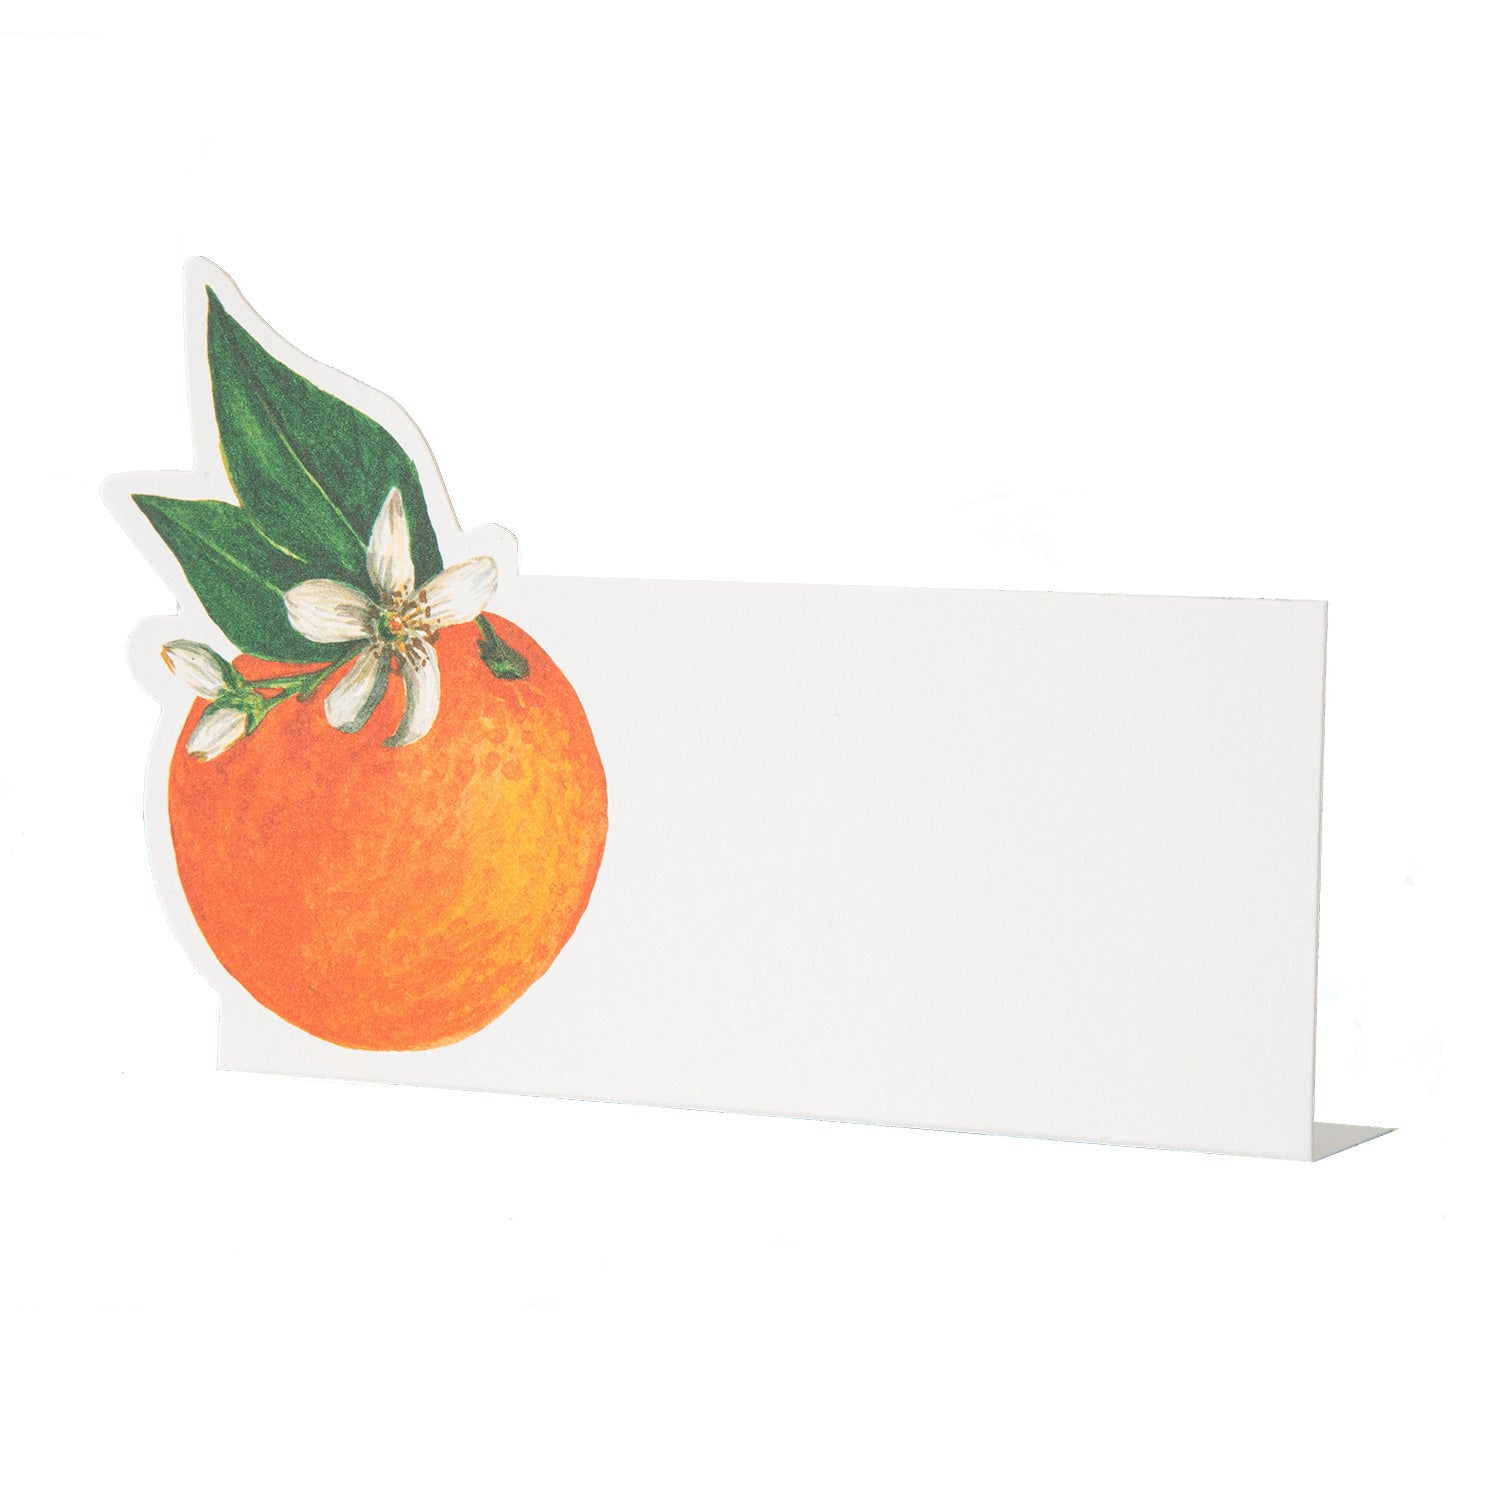 A white, rectangular freestanding place card featuring artwork of a vibrant orange with green leaves and white blossoms adorning the left side.